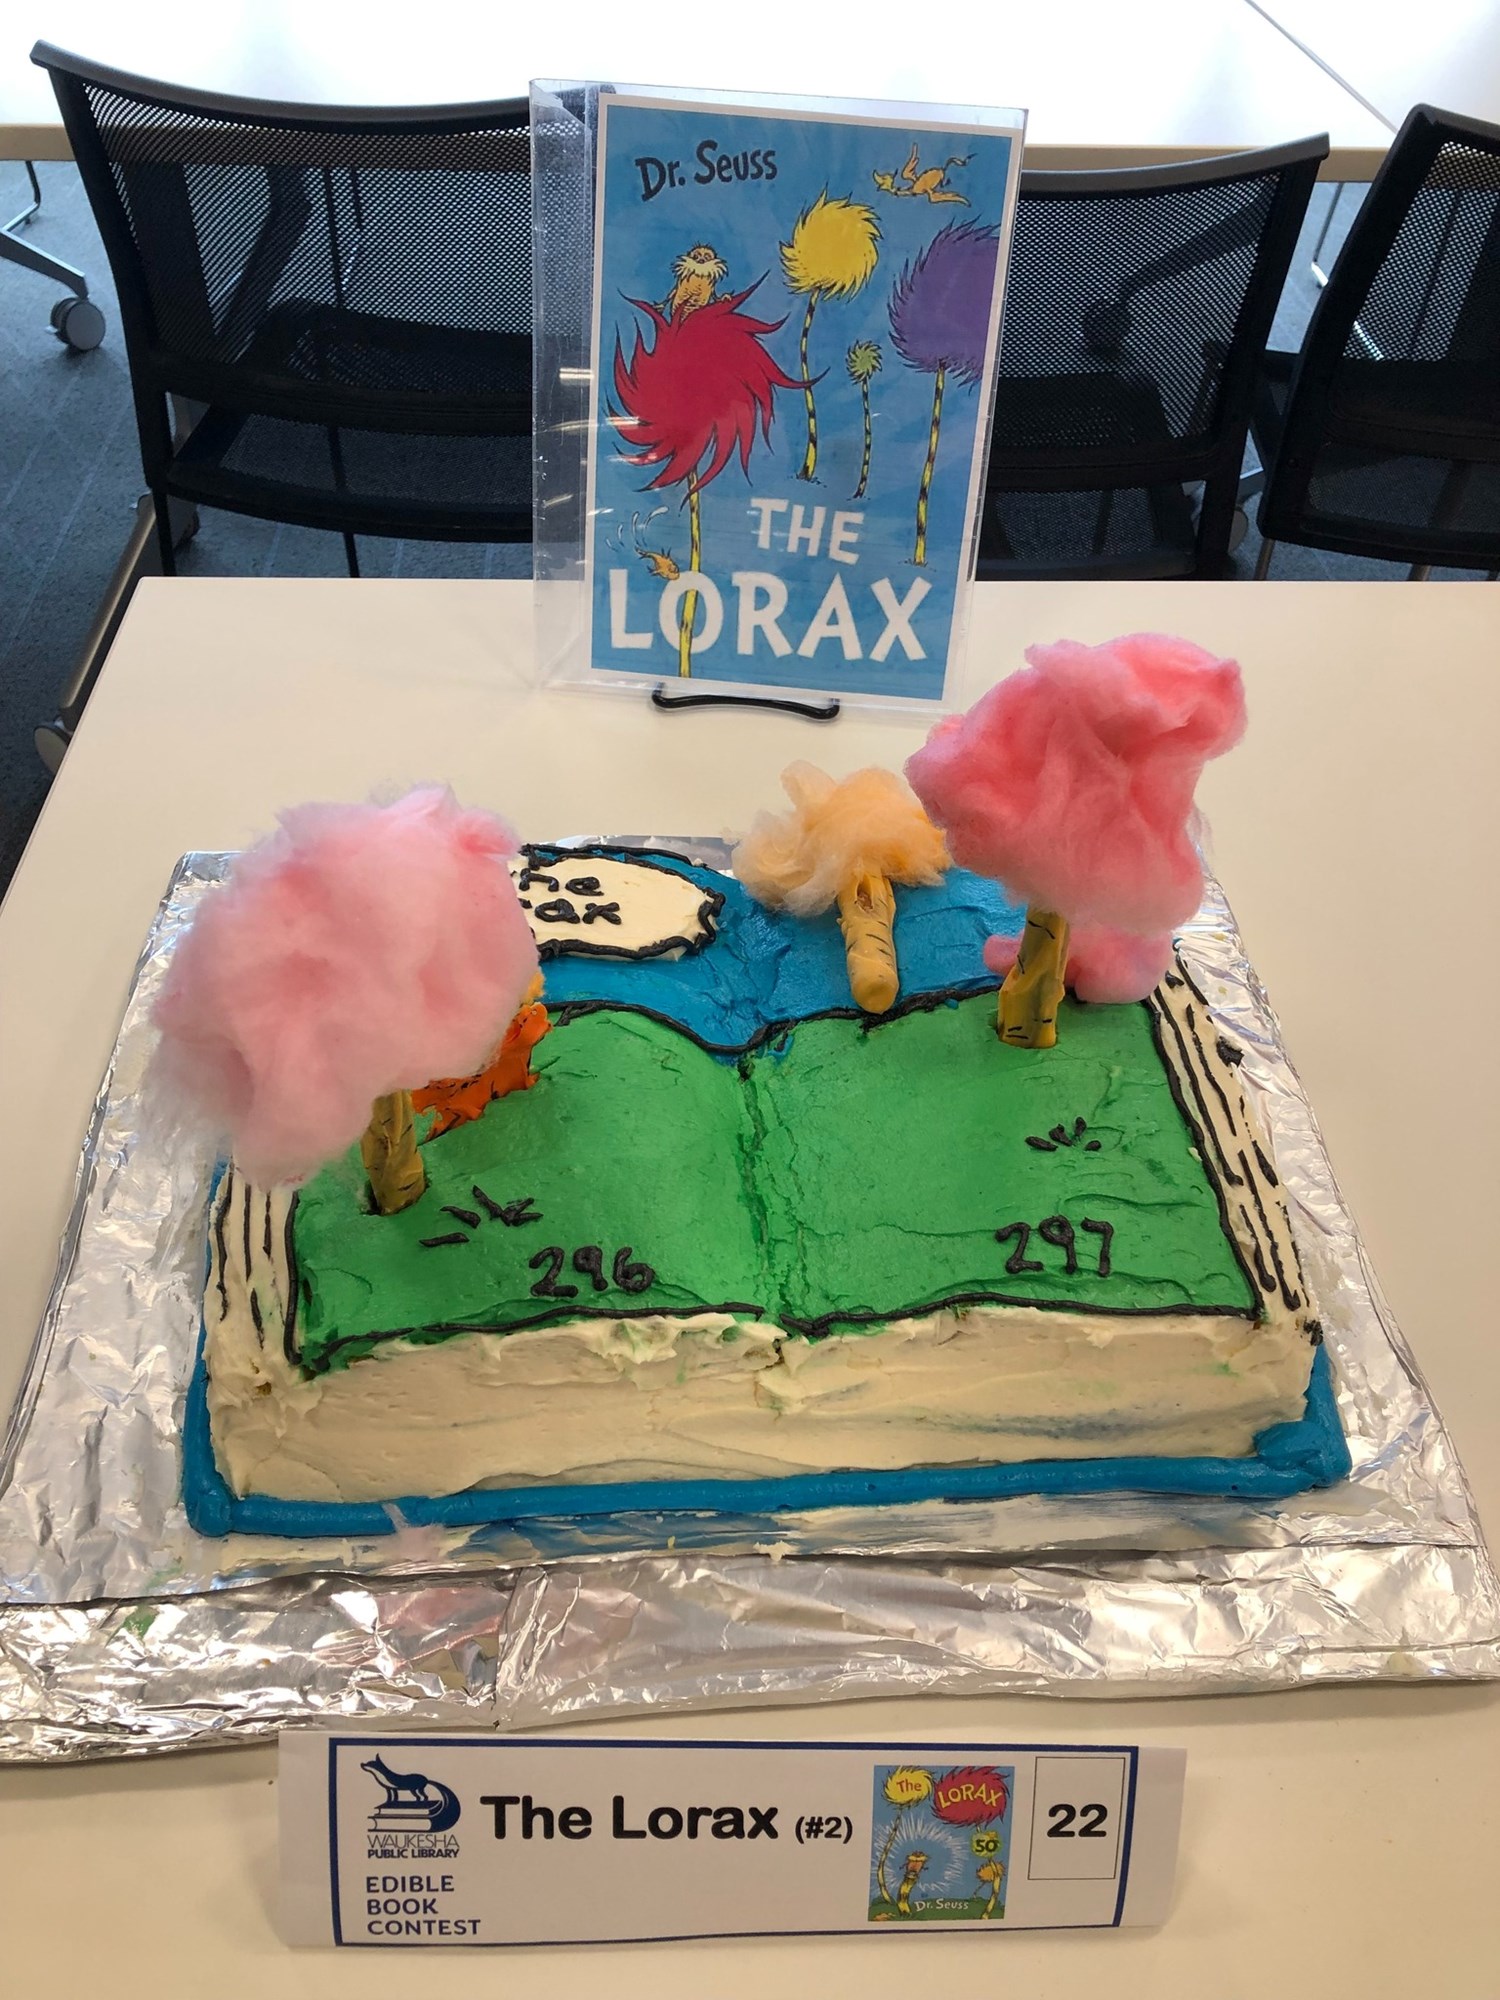 A decorated cake features The Lorax characters from Dr. Seuss's book